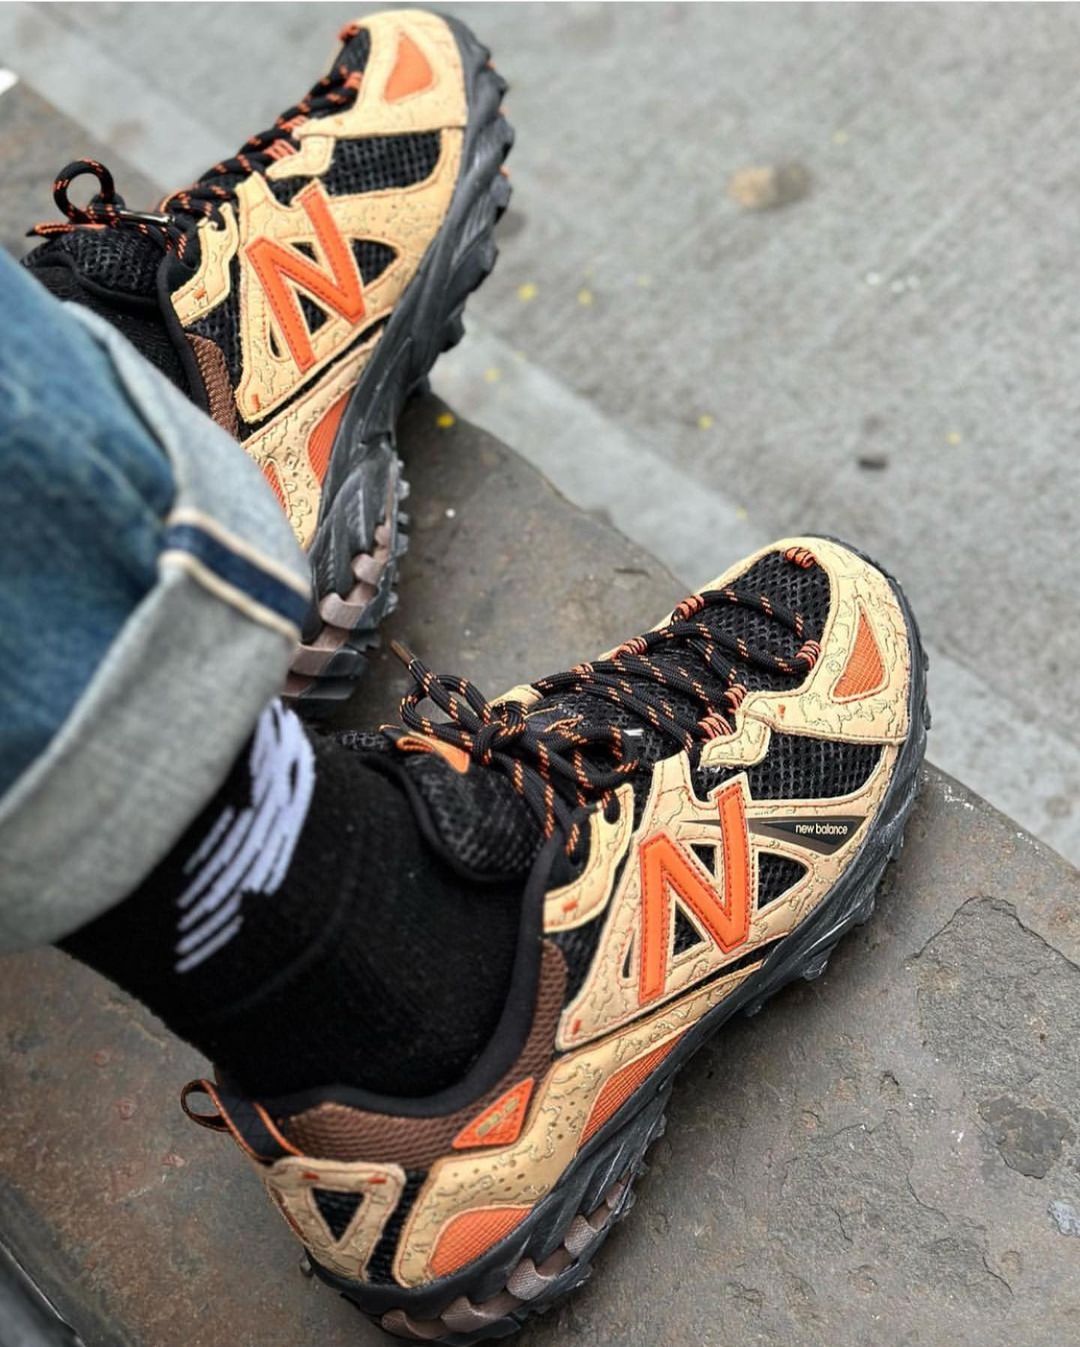 theshoegame@instagram on Pinno: Coming soon. Here's an on foot